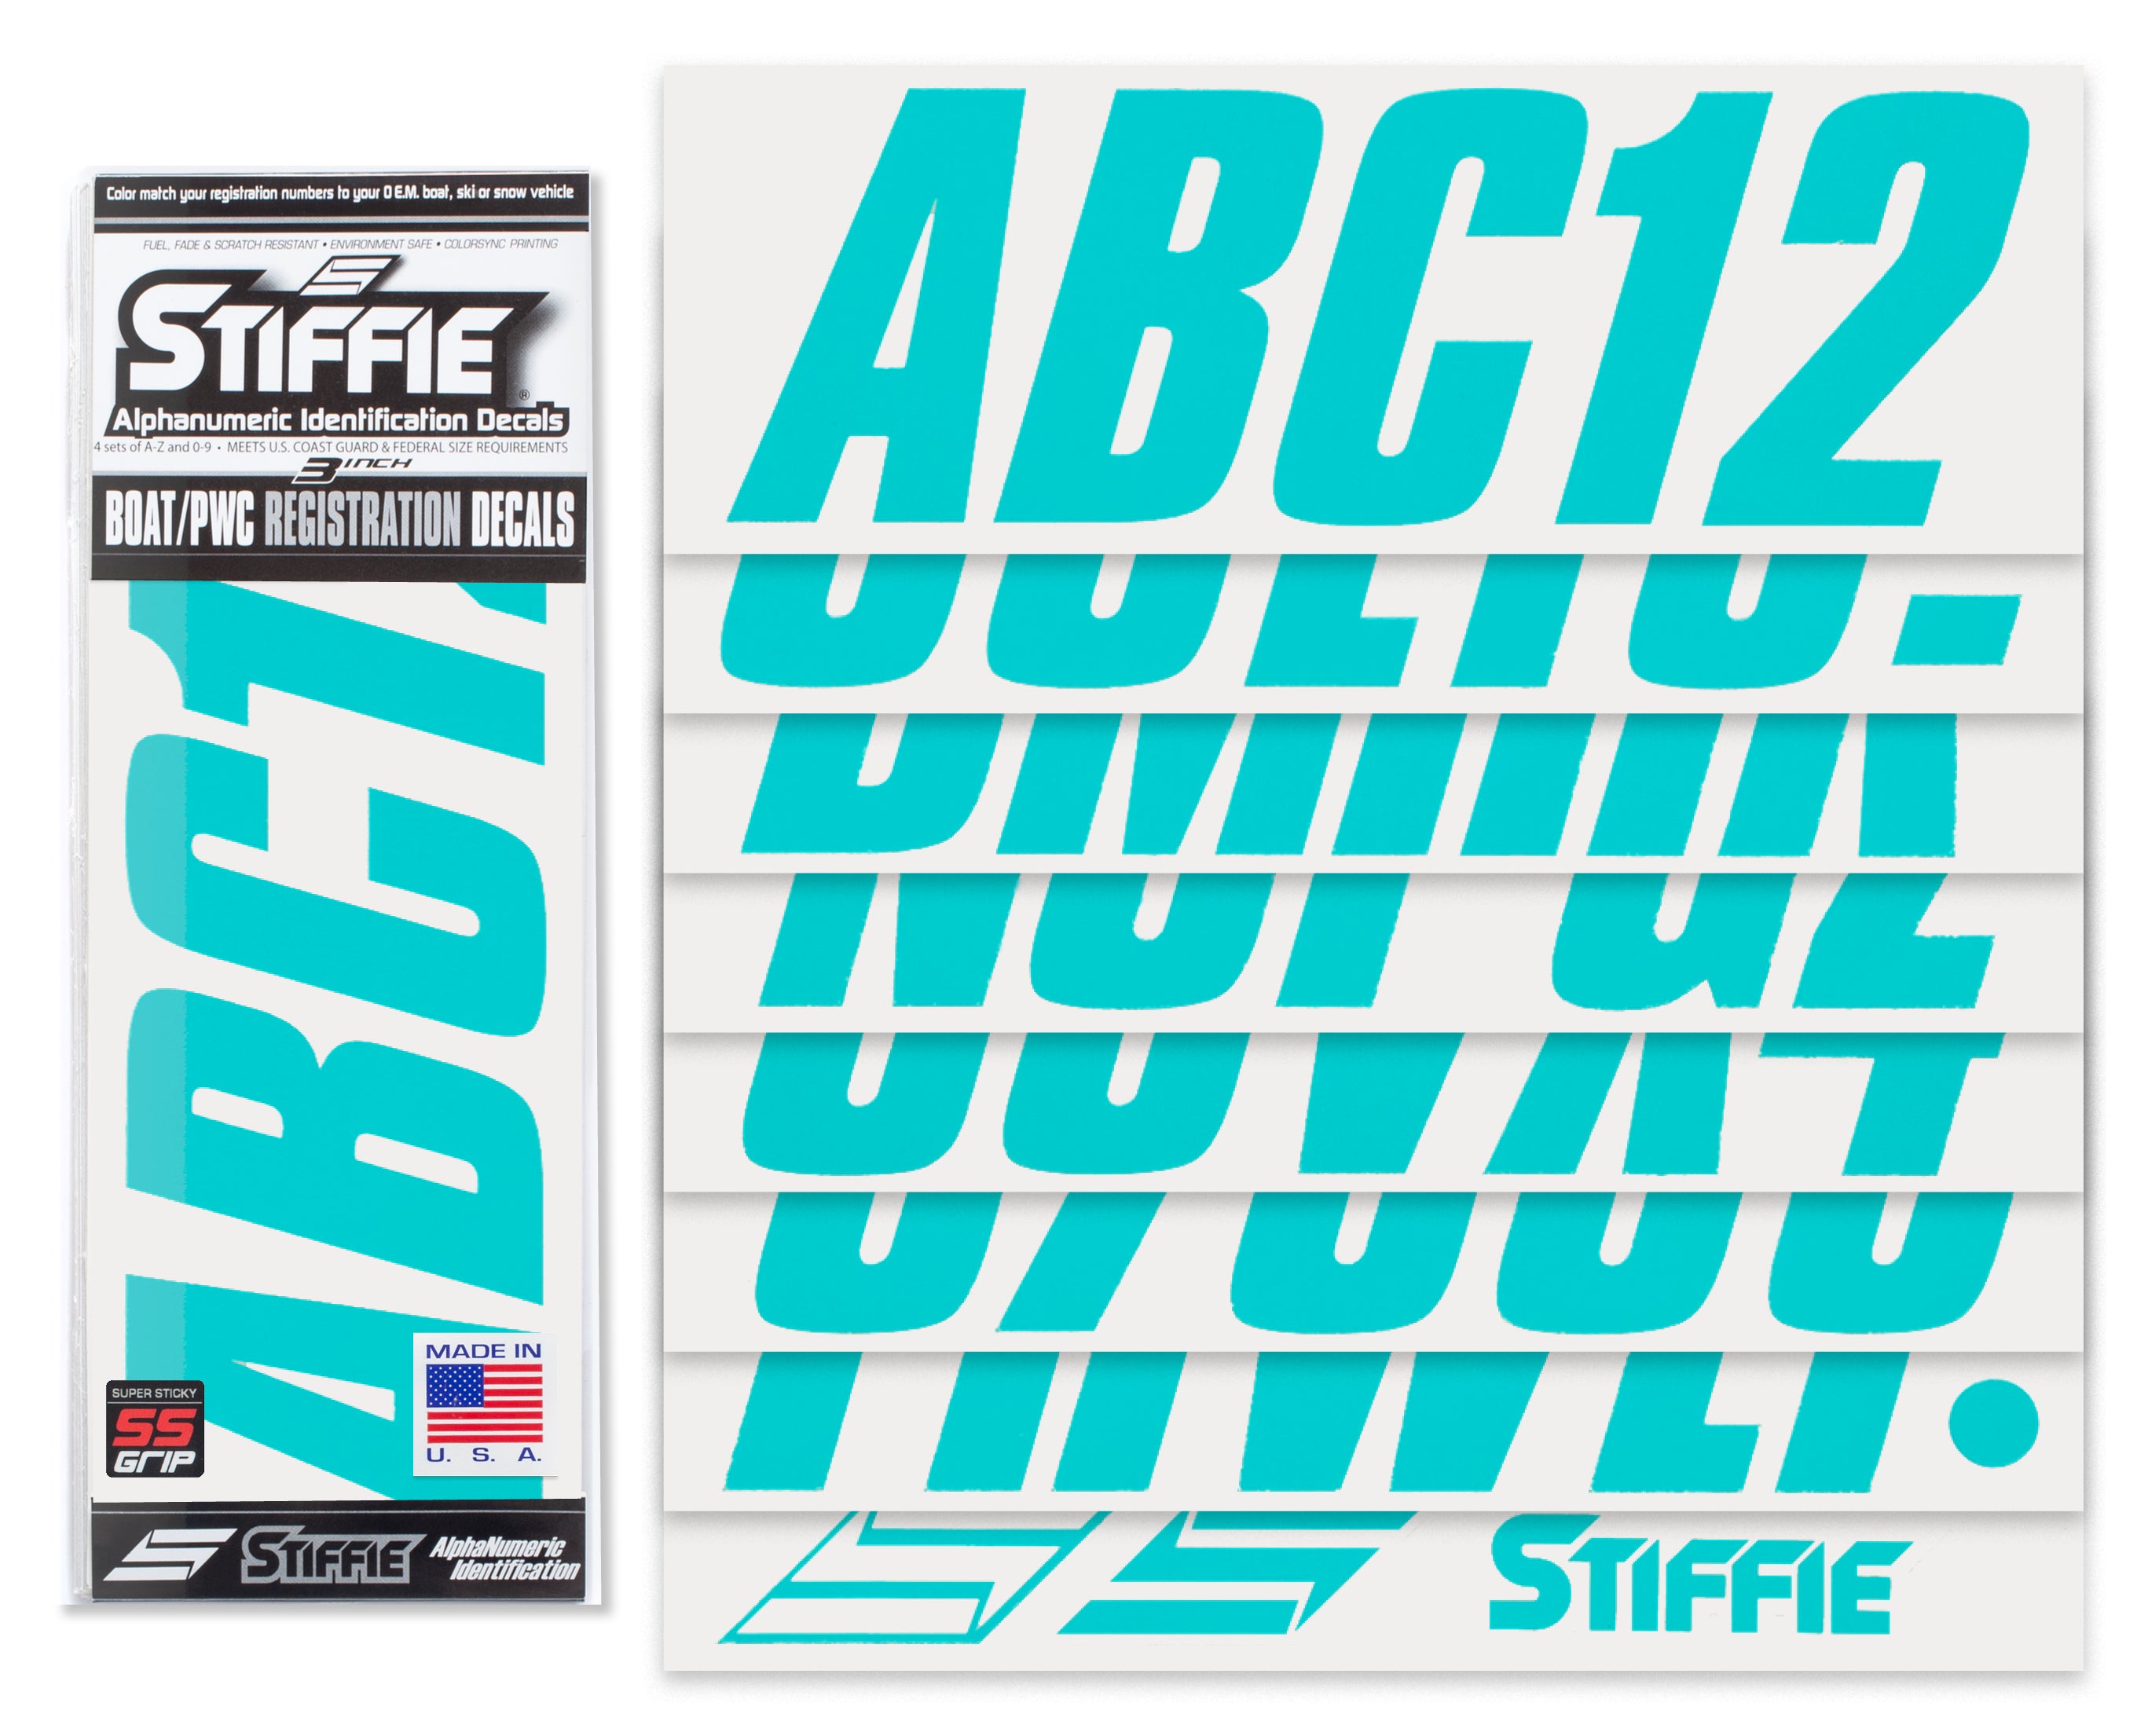 STIFFIE Shift Candy Blue Super Sticky 3" Alpha Numeric Registration Identification Numbers Stickers Decals for Sea-Doo Spark, Inflatable Boats, Ribs, Hypalon/PVC, PWC and Boats.